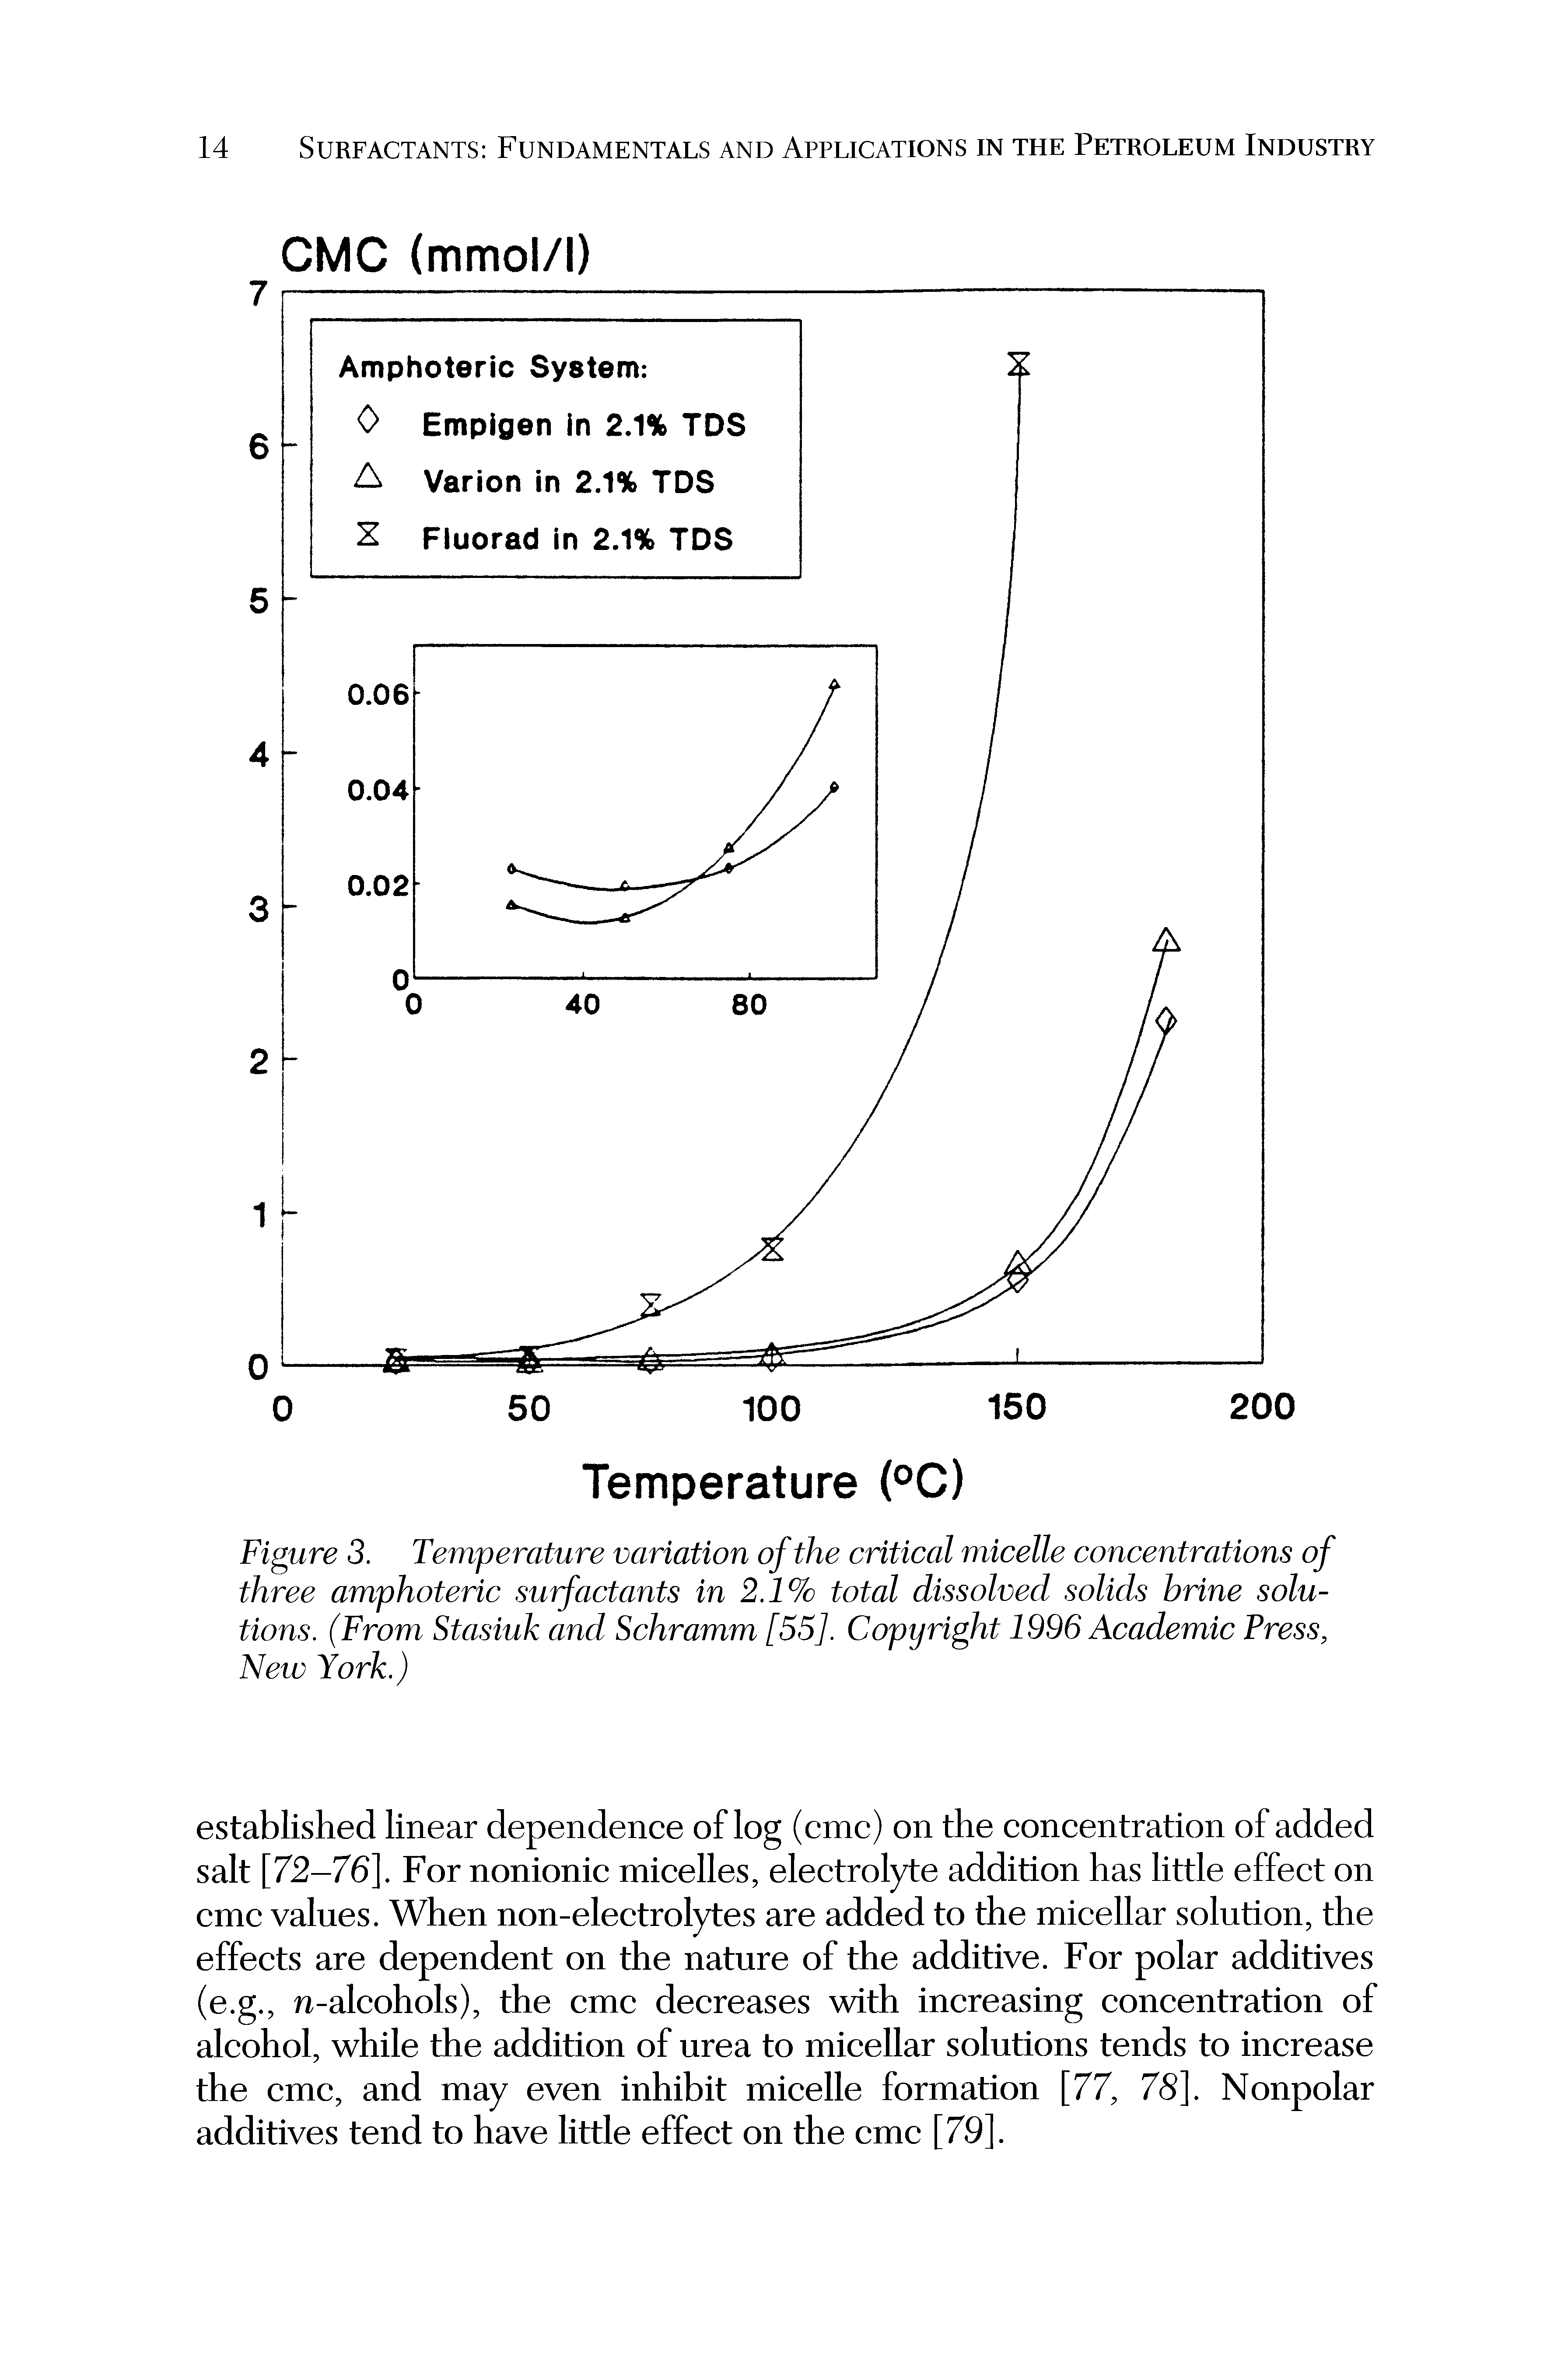 Figure 3. Temperature variation of the critical micelle concentrations of three amphoteric surfactants in 2.1% total dissolved solids brine solutions. (From Stasiuk and Schramm [55]. Copyright 1996 Academic Press, New York.)...